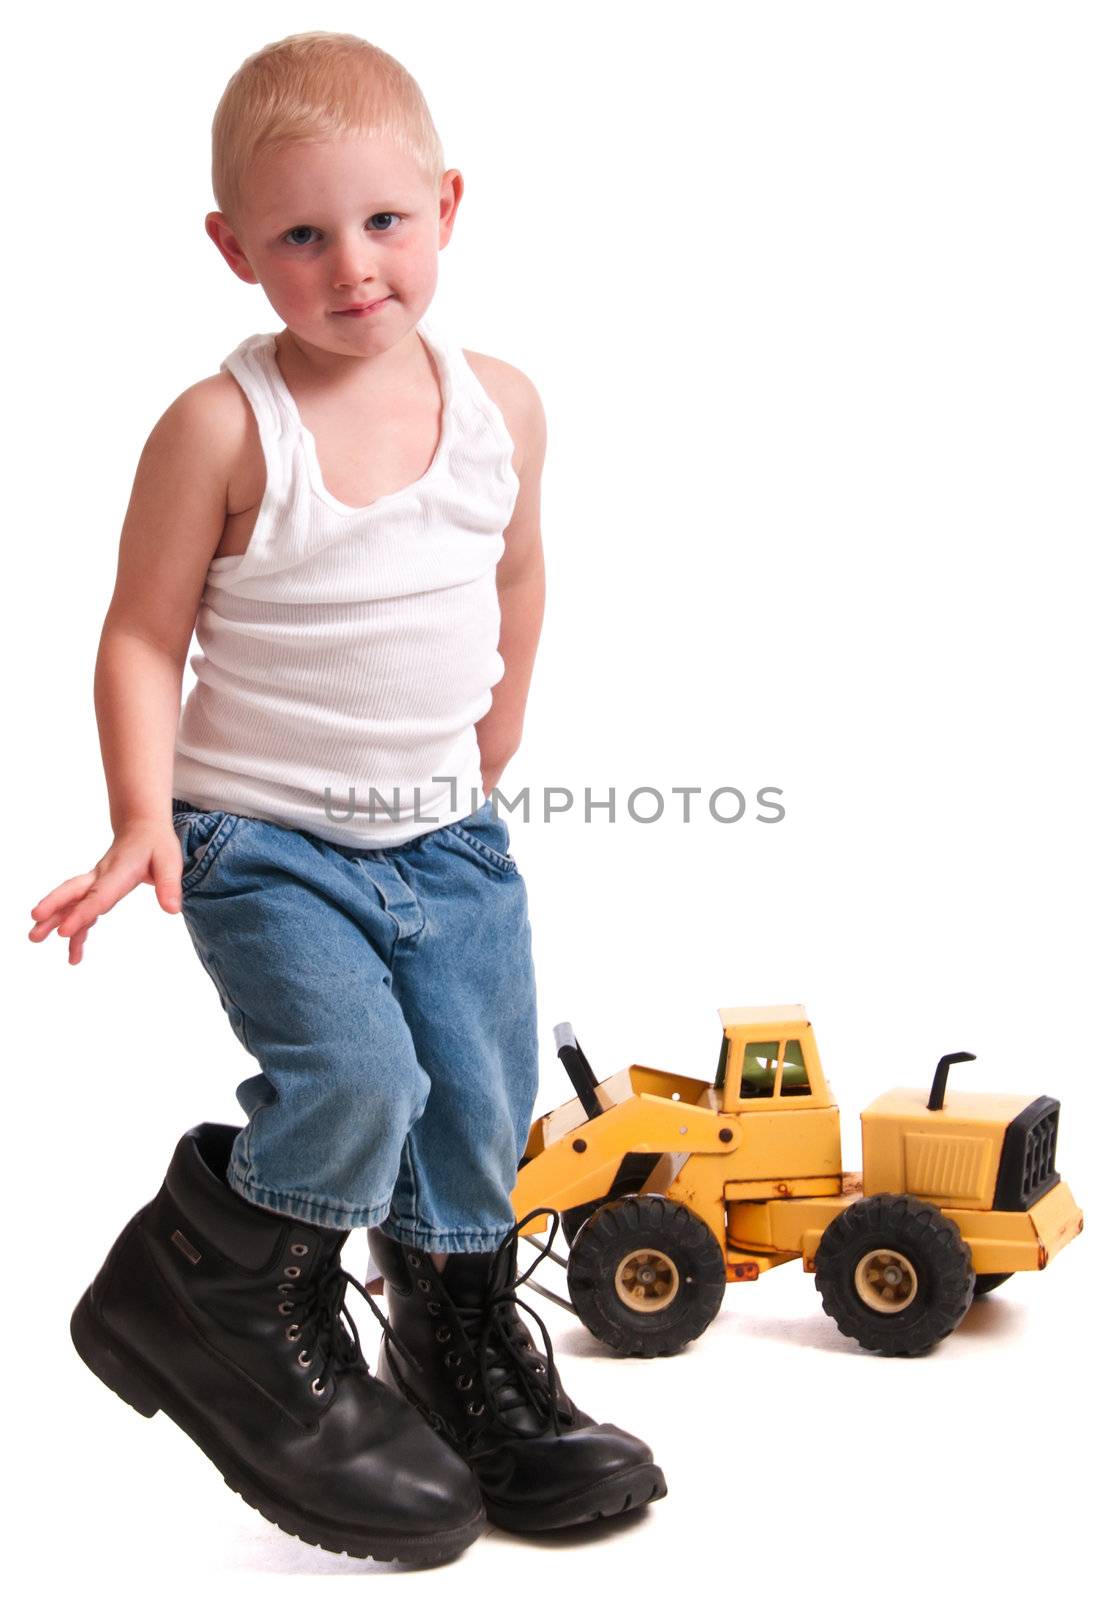 Cute little boy with daddy's boots playing with a toy.